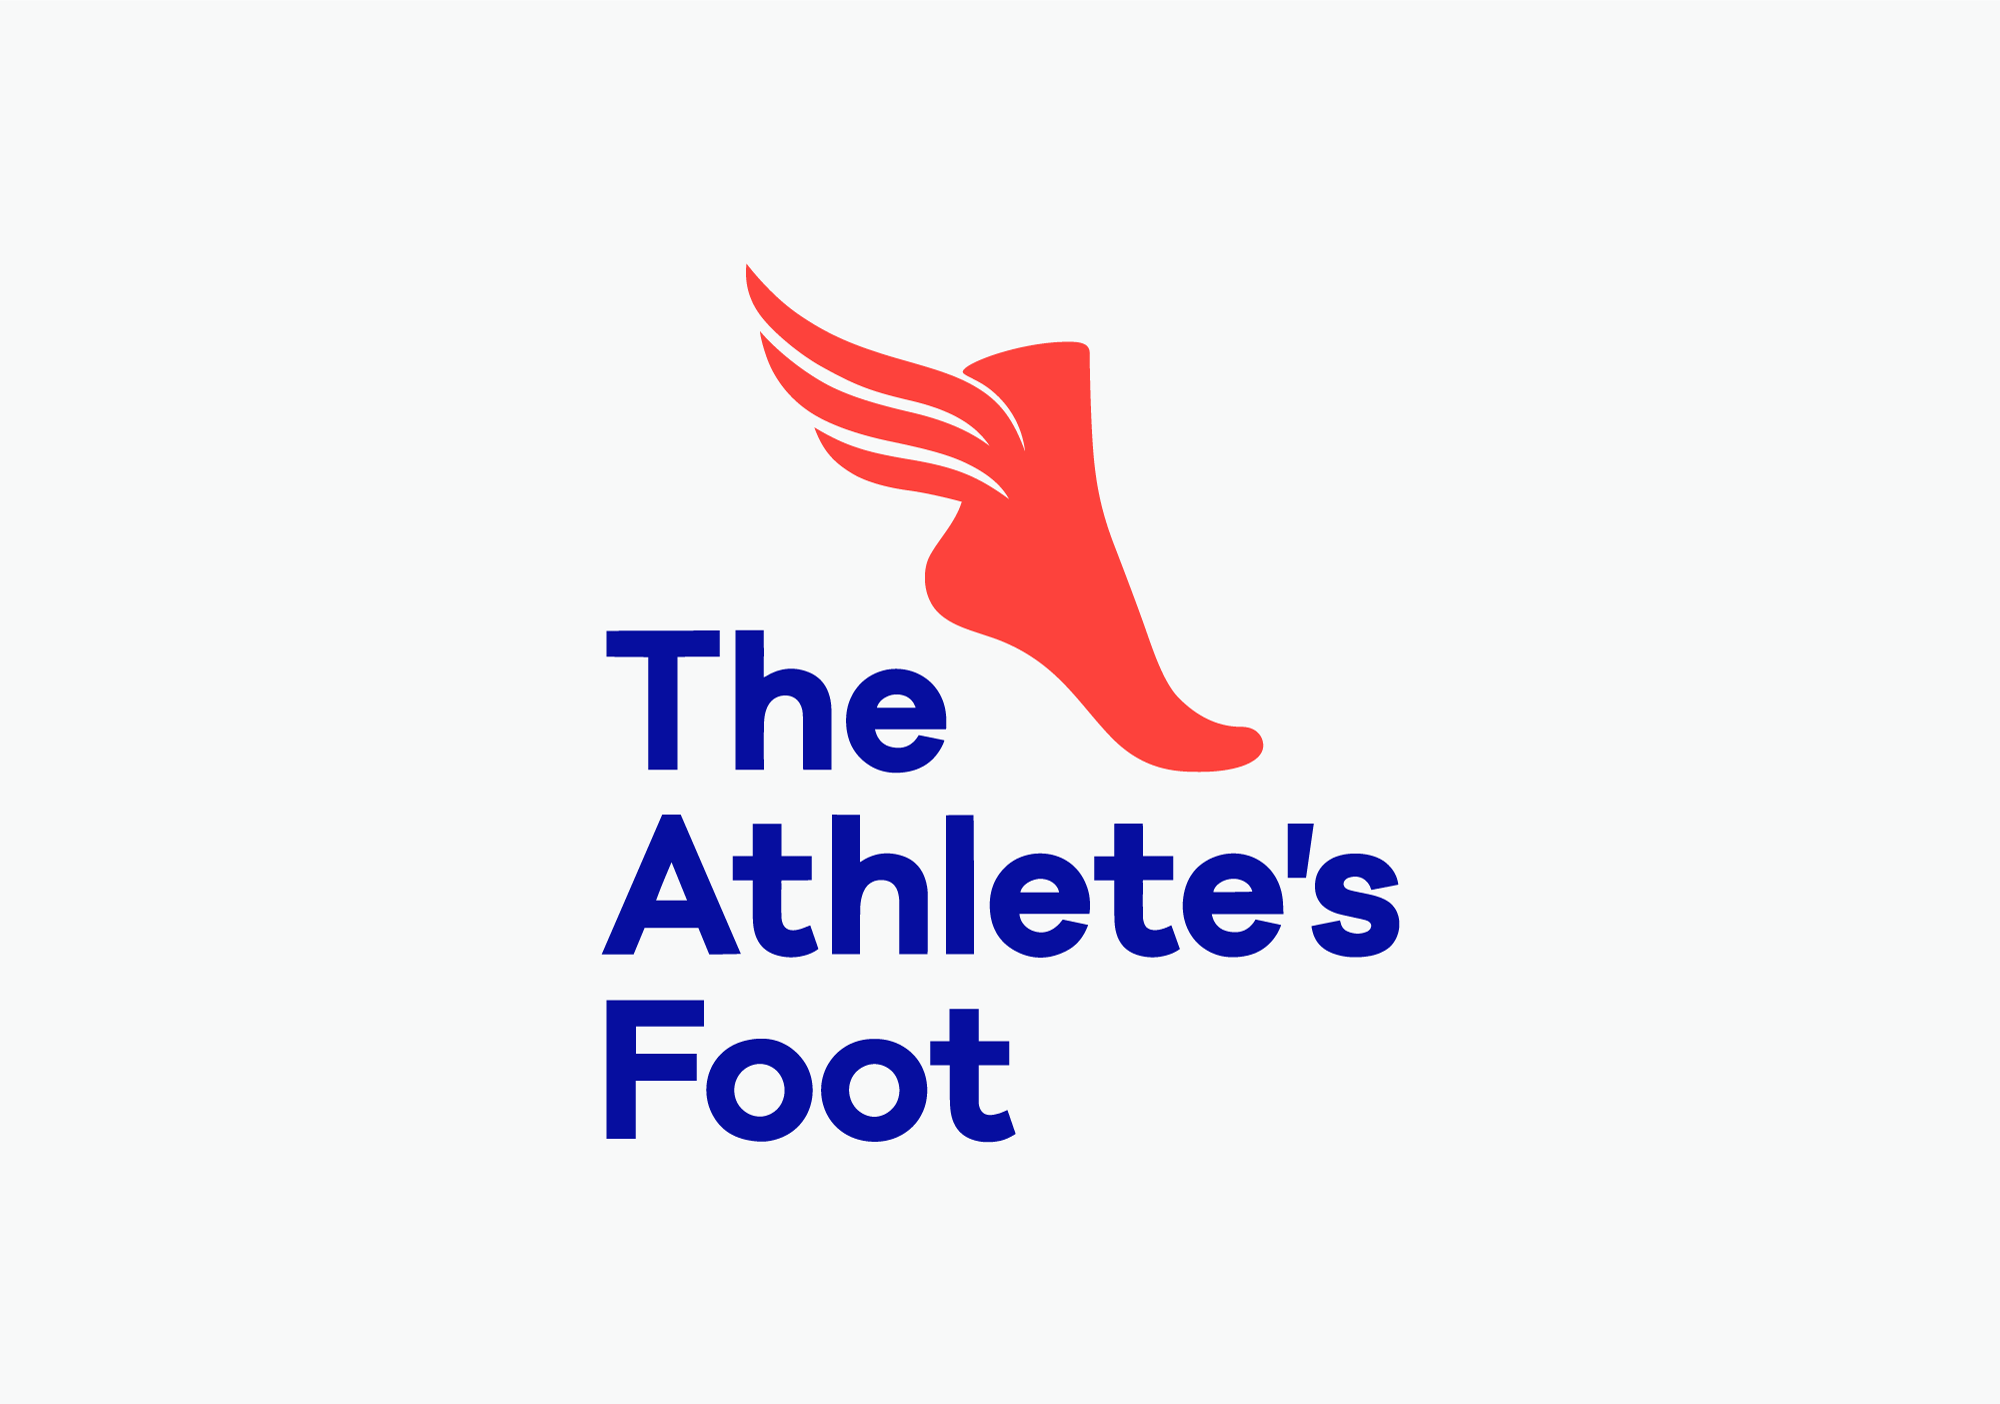 Intersport sells The Athlete’s Foot to Arklyz Group